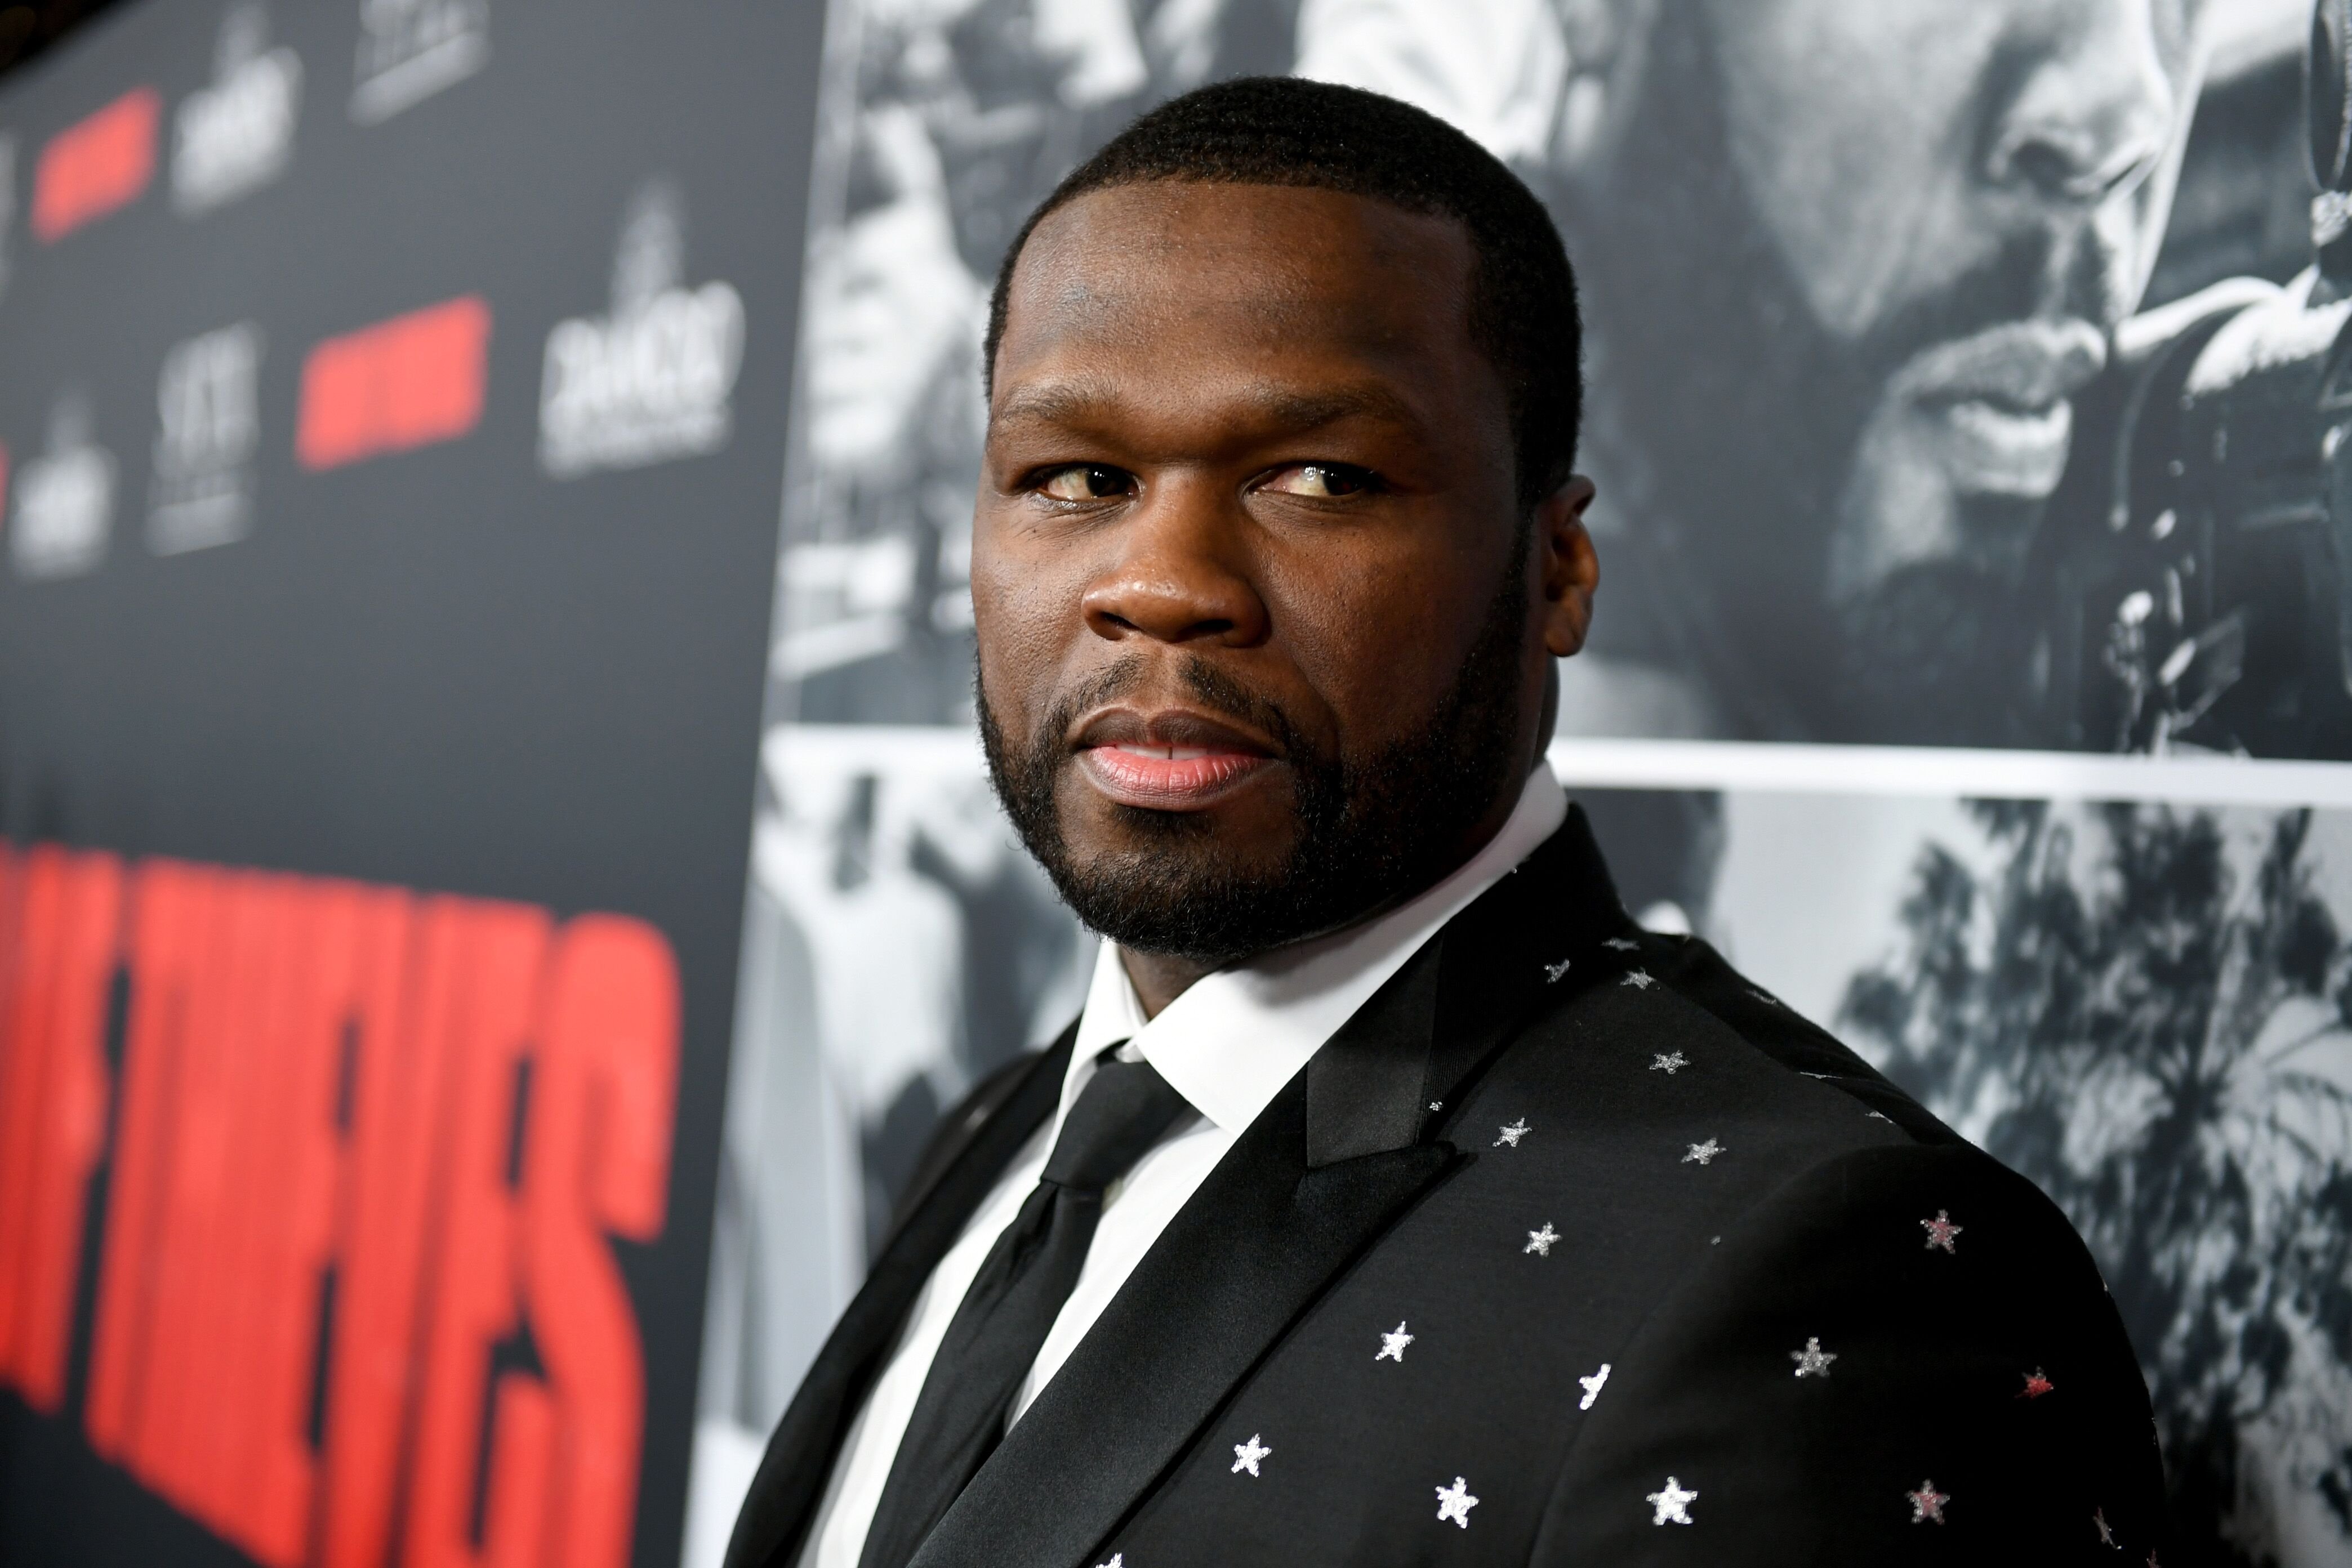 50 Cent attends the 2018 premiere of "Den of Thieves" in Los Angeles, California | Source: Getty Images